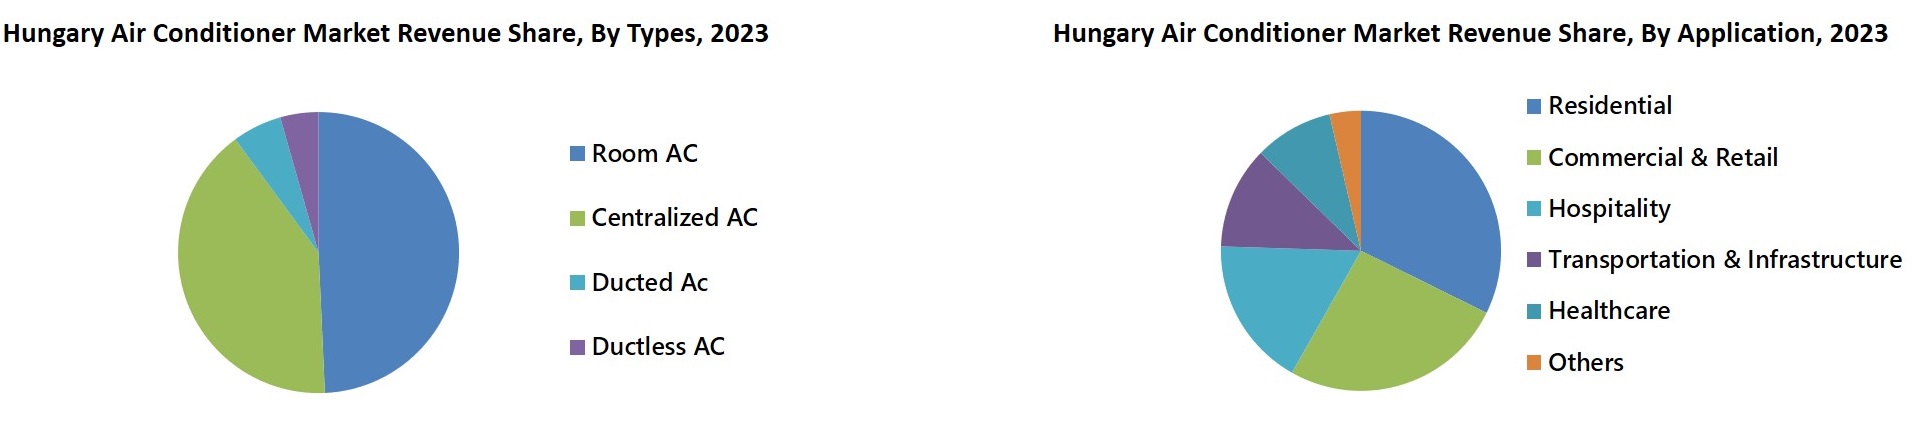 Hungary Air Conditioner Market 